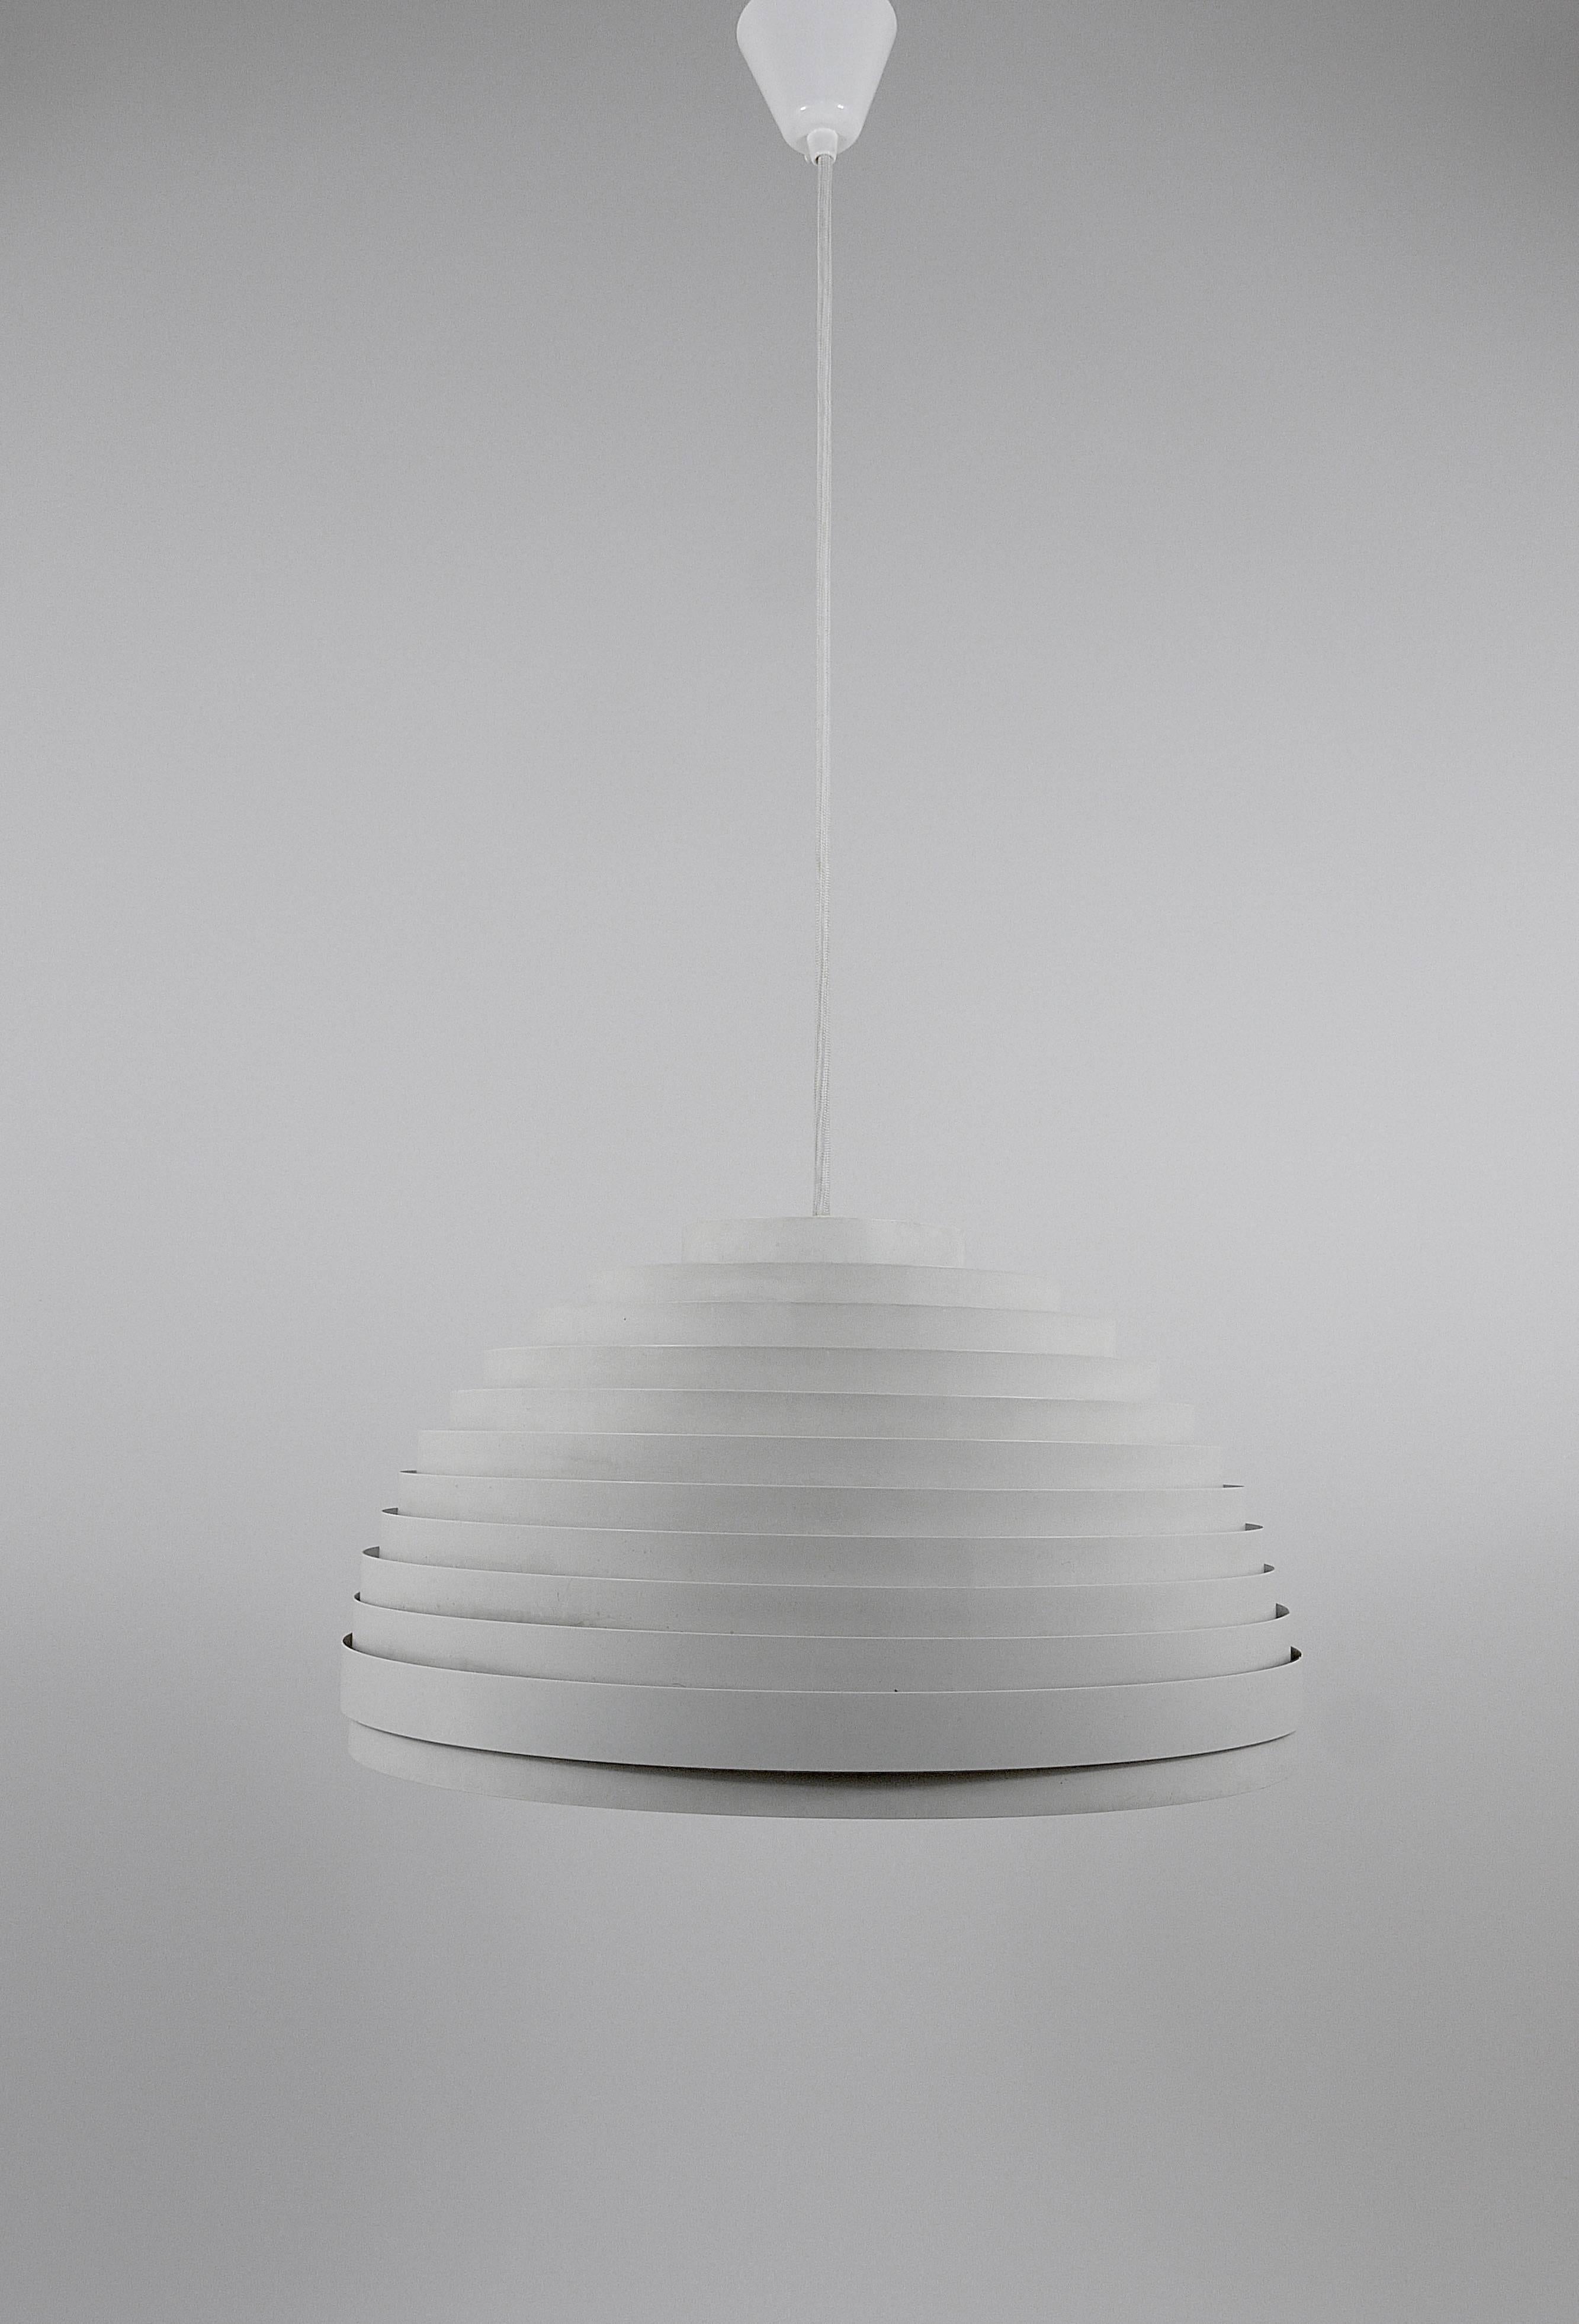 A beautiful white hemispherical Space Age lamella pendant light from the 1960s, model 